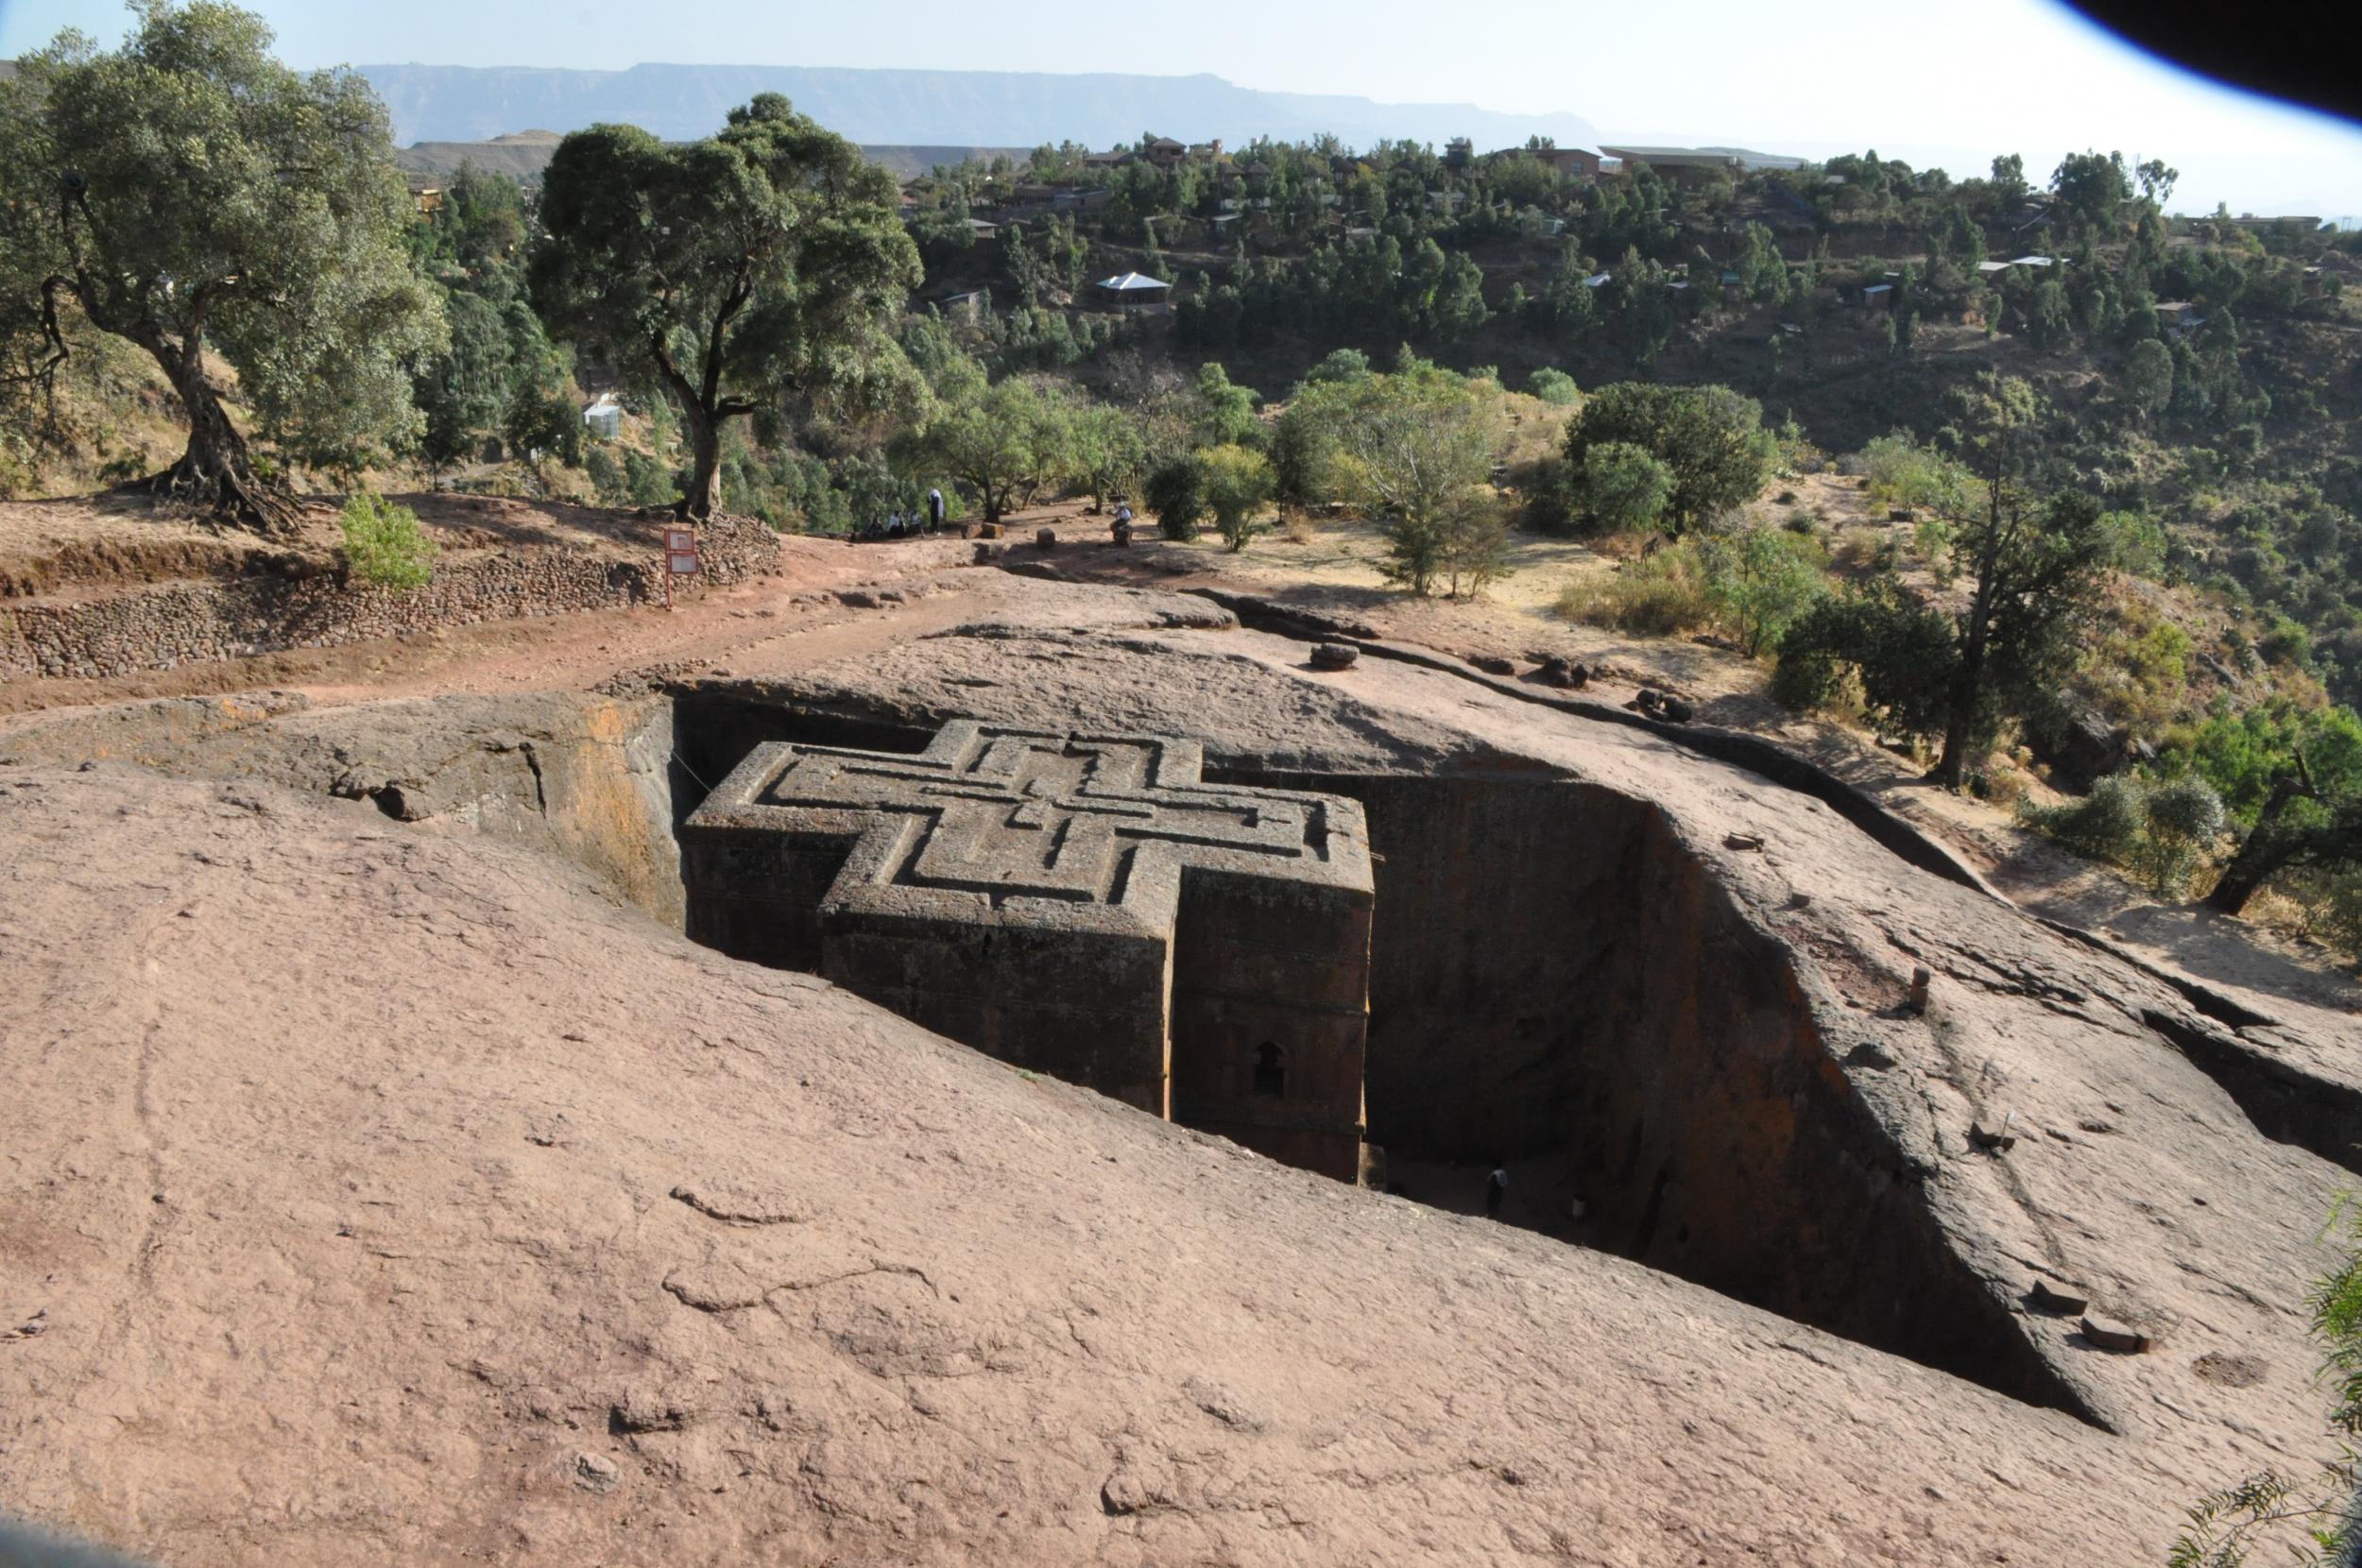 Ethiopia is packed with rock-hewn churches